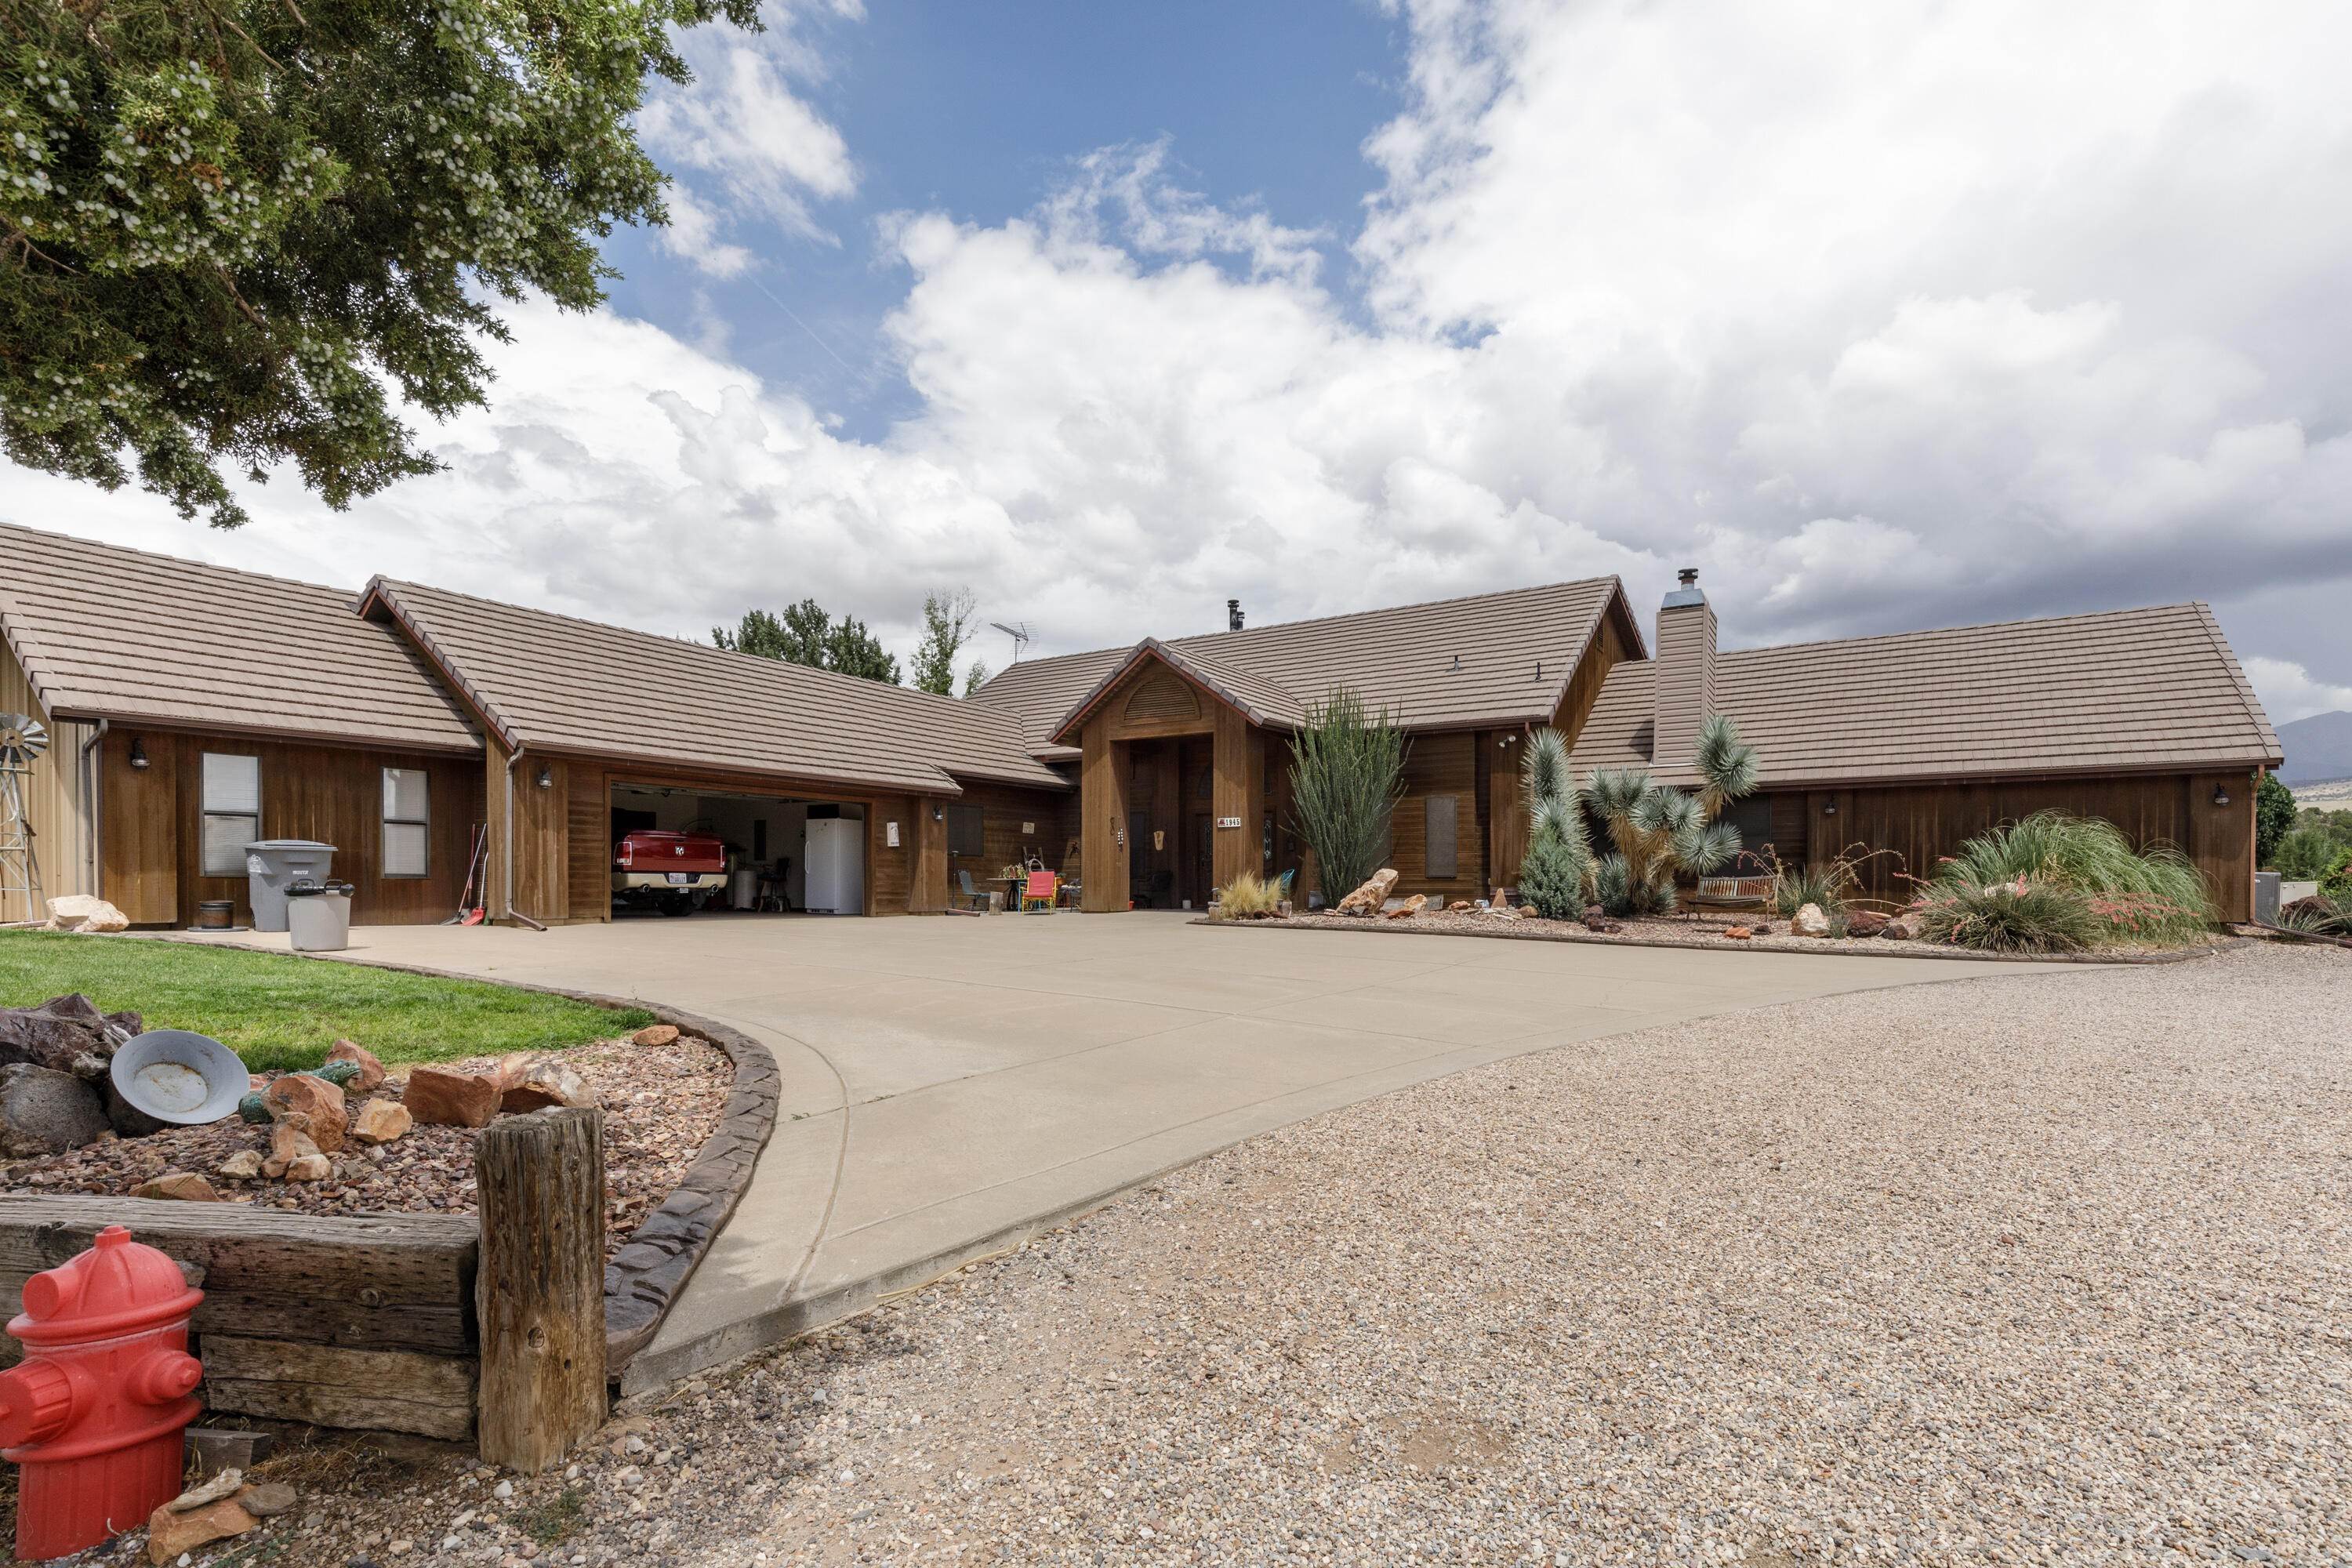 Property for Sale at 1945 Dammeron Valley Drive Dammeron Valley, Utah 84783 United States